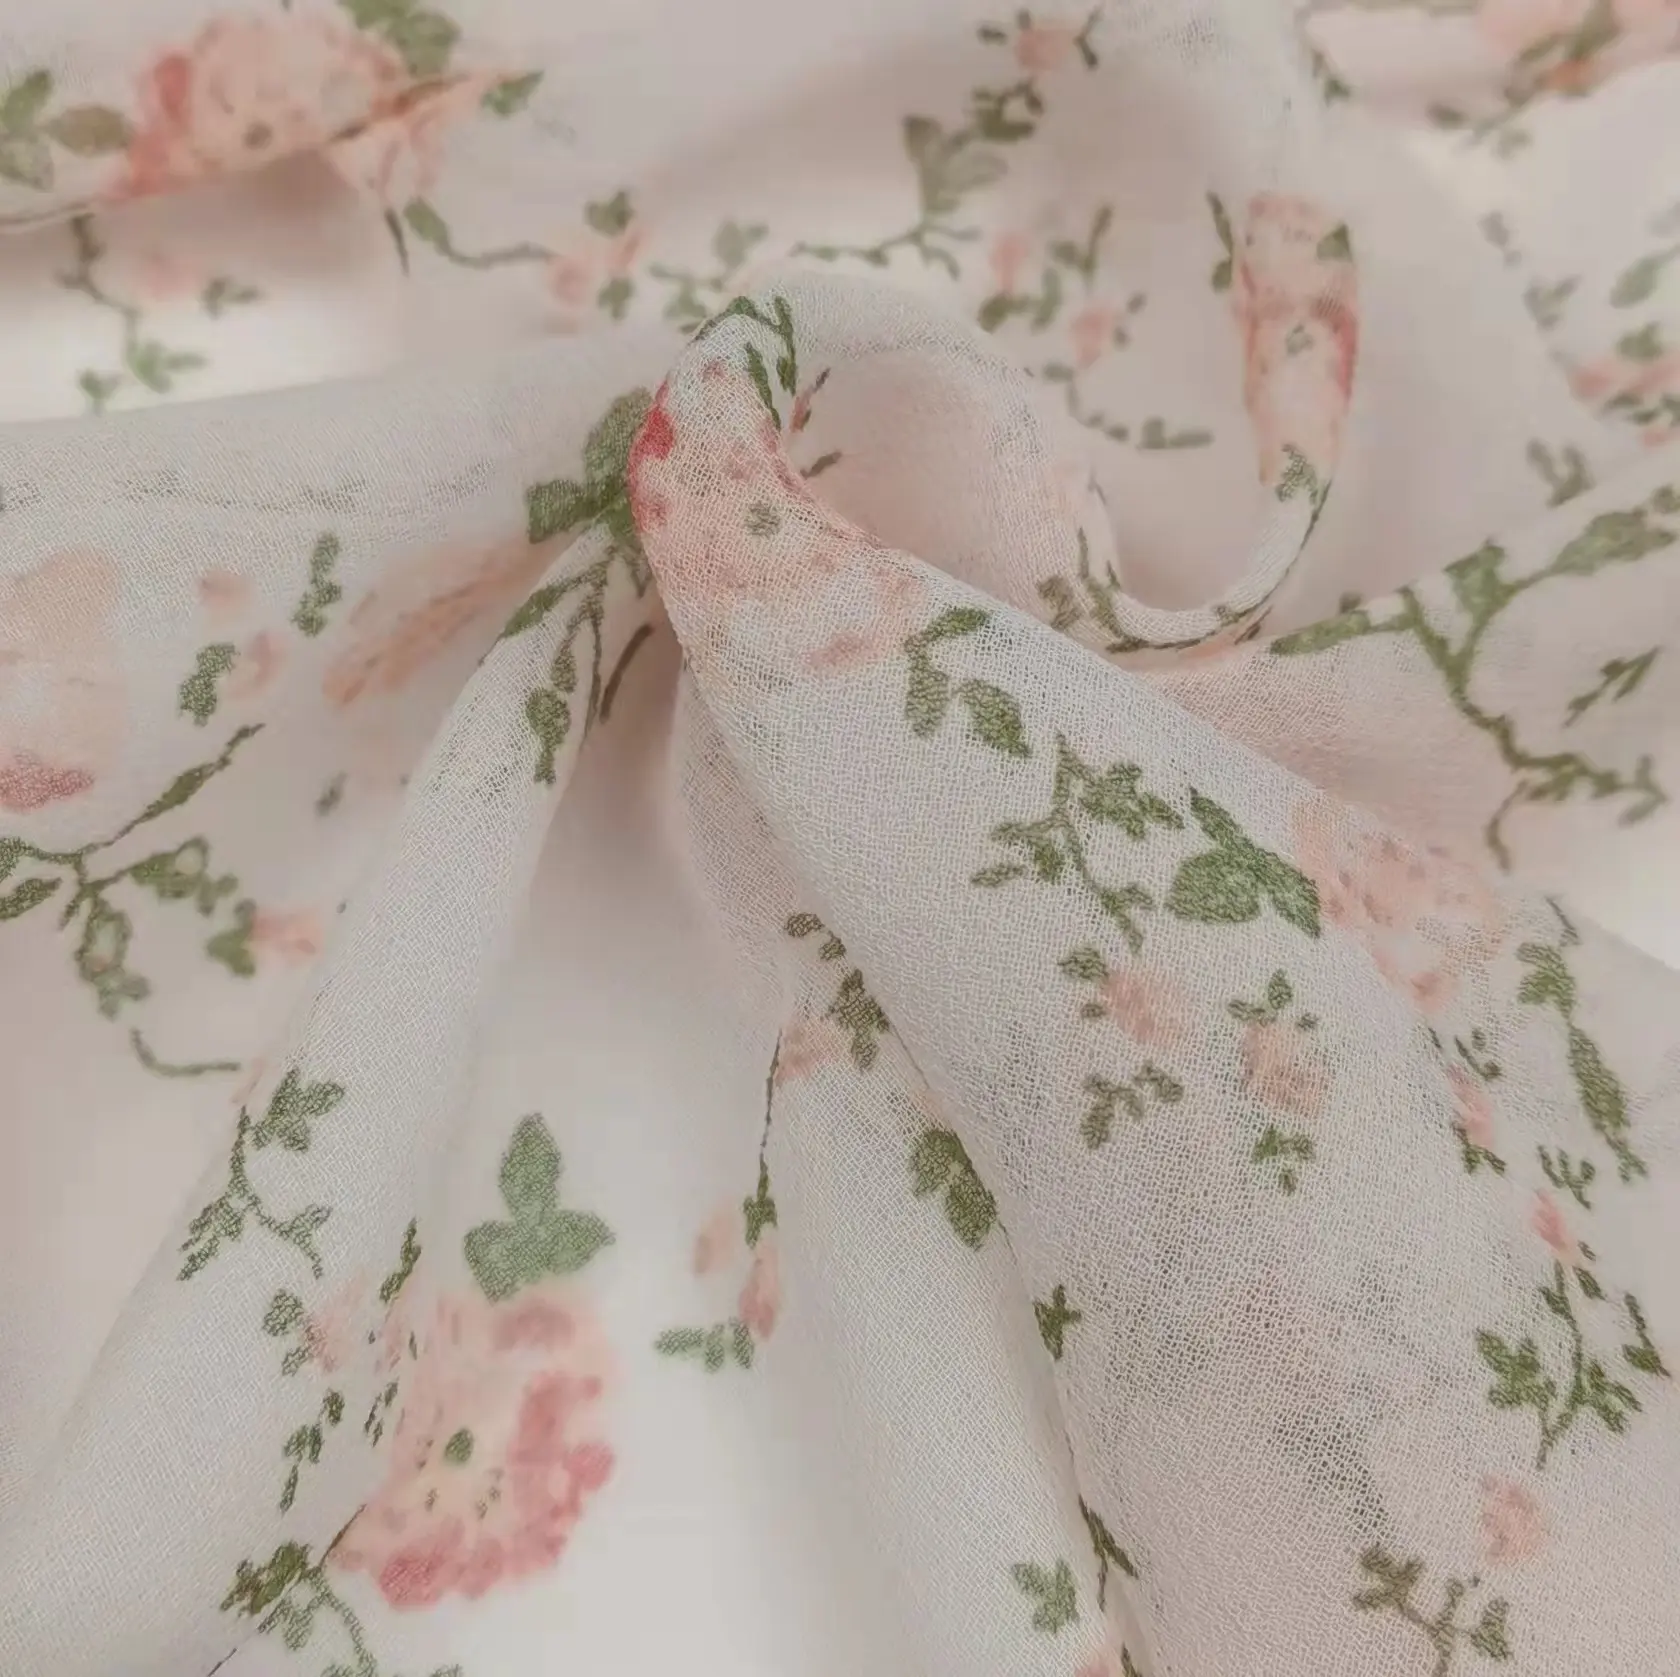 100% Polyester Flower Printing Composite Silk Chiffon Fabric Woven Pattern Design for Girls' Dresses Skirts Dense 20D Yarn Count